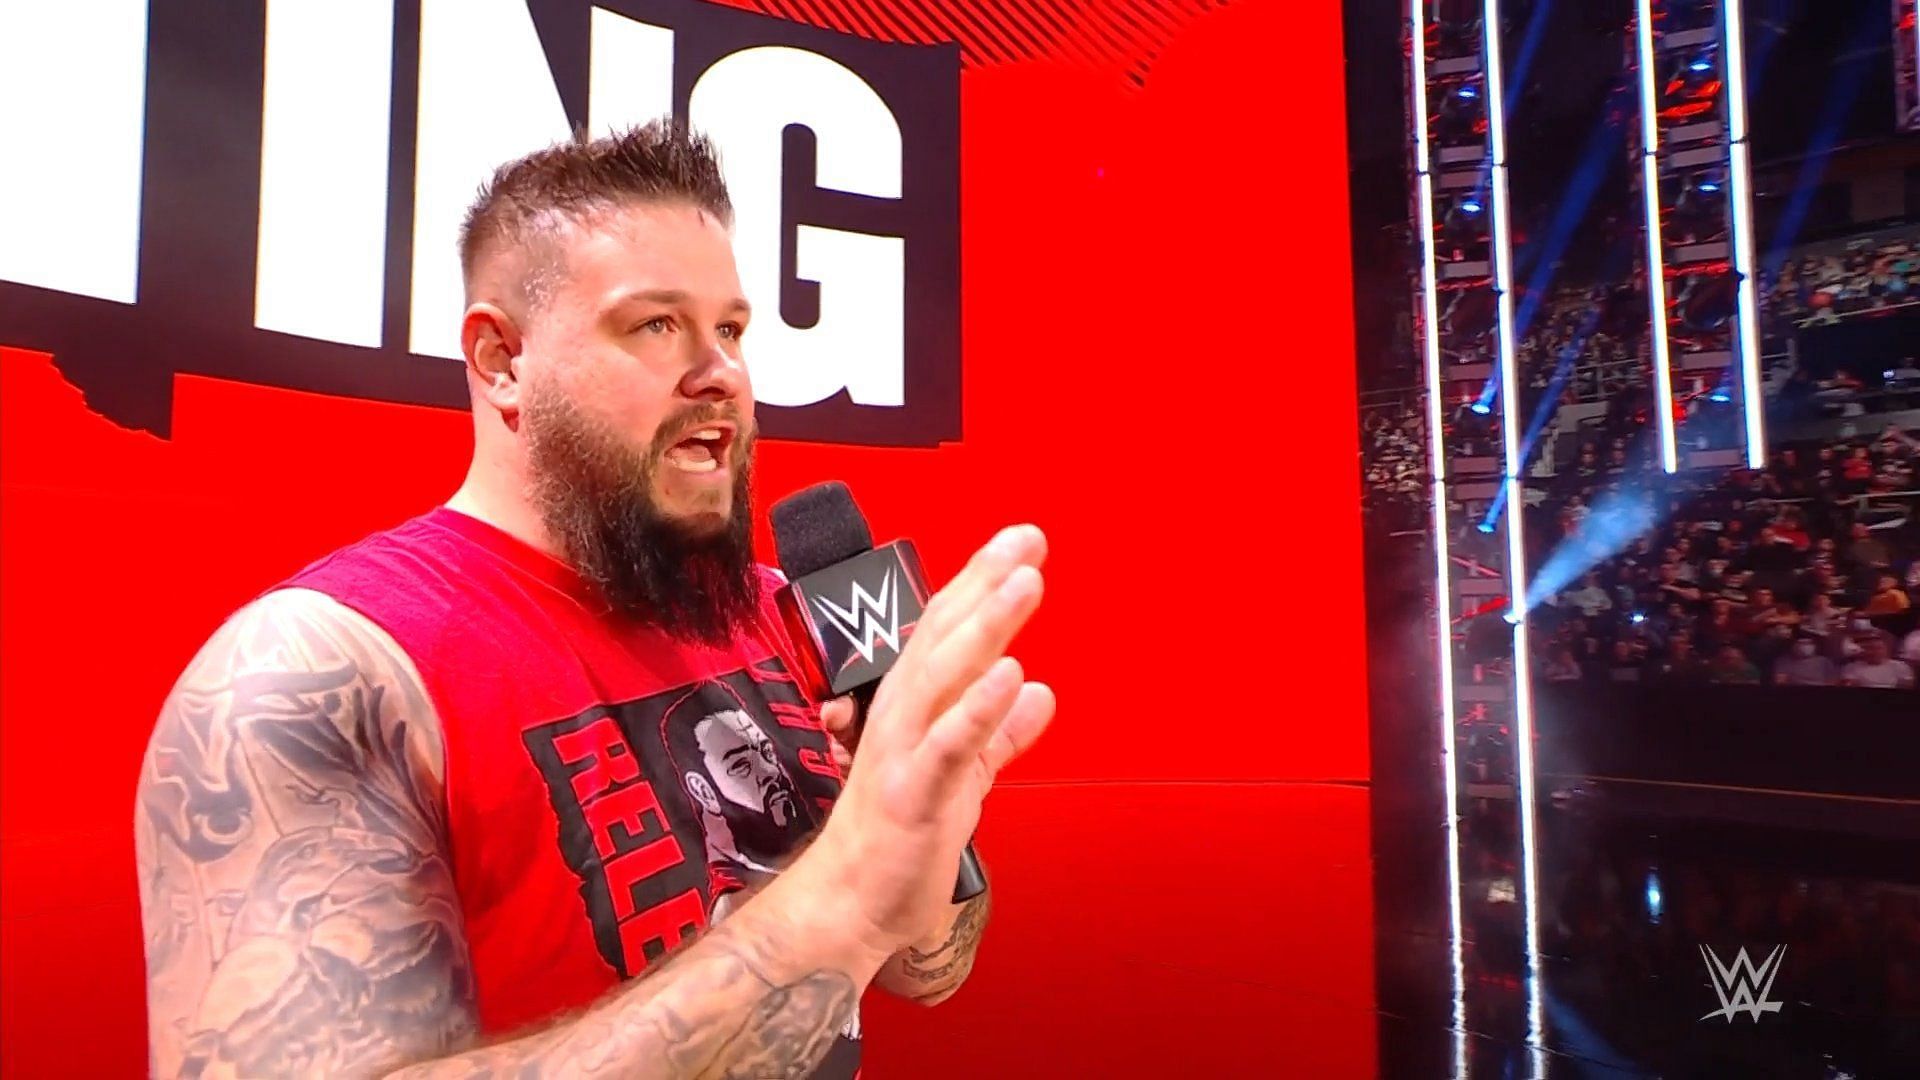 KO is one of the biggest babyfaces on RAW today.